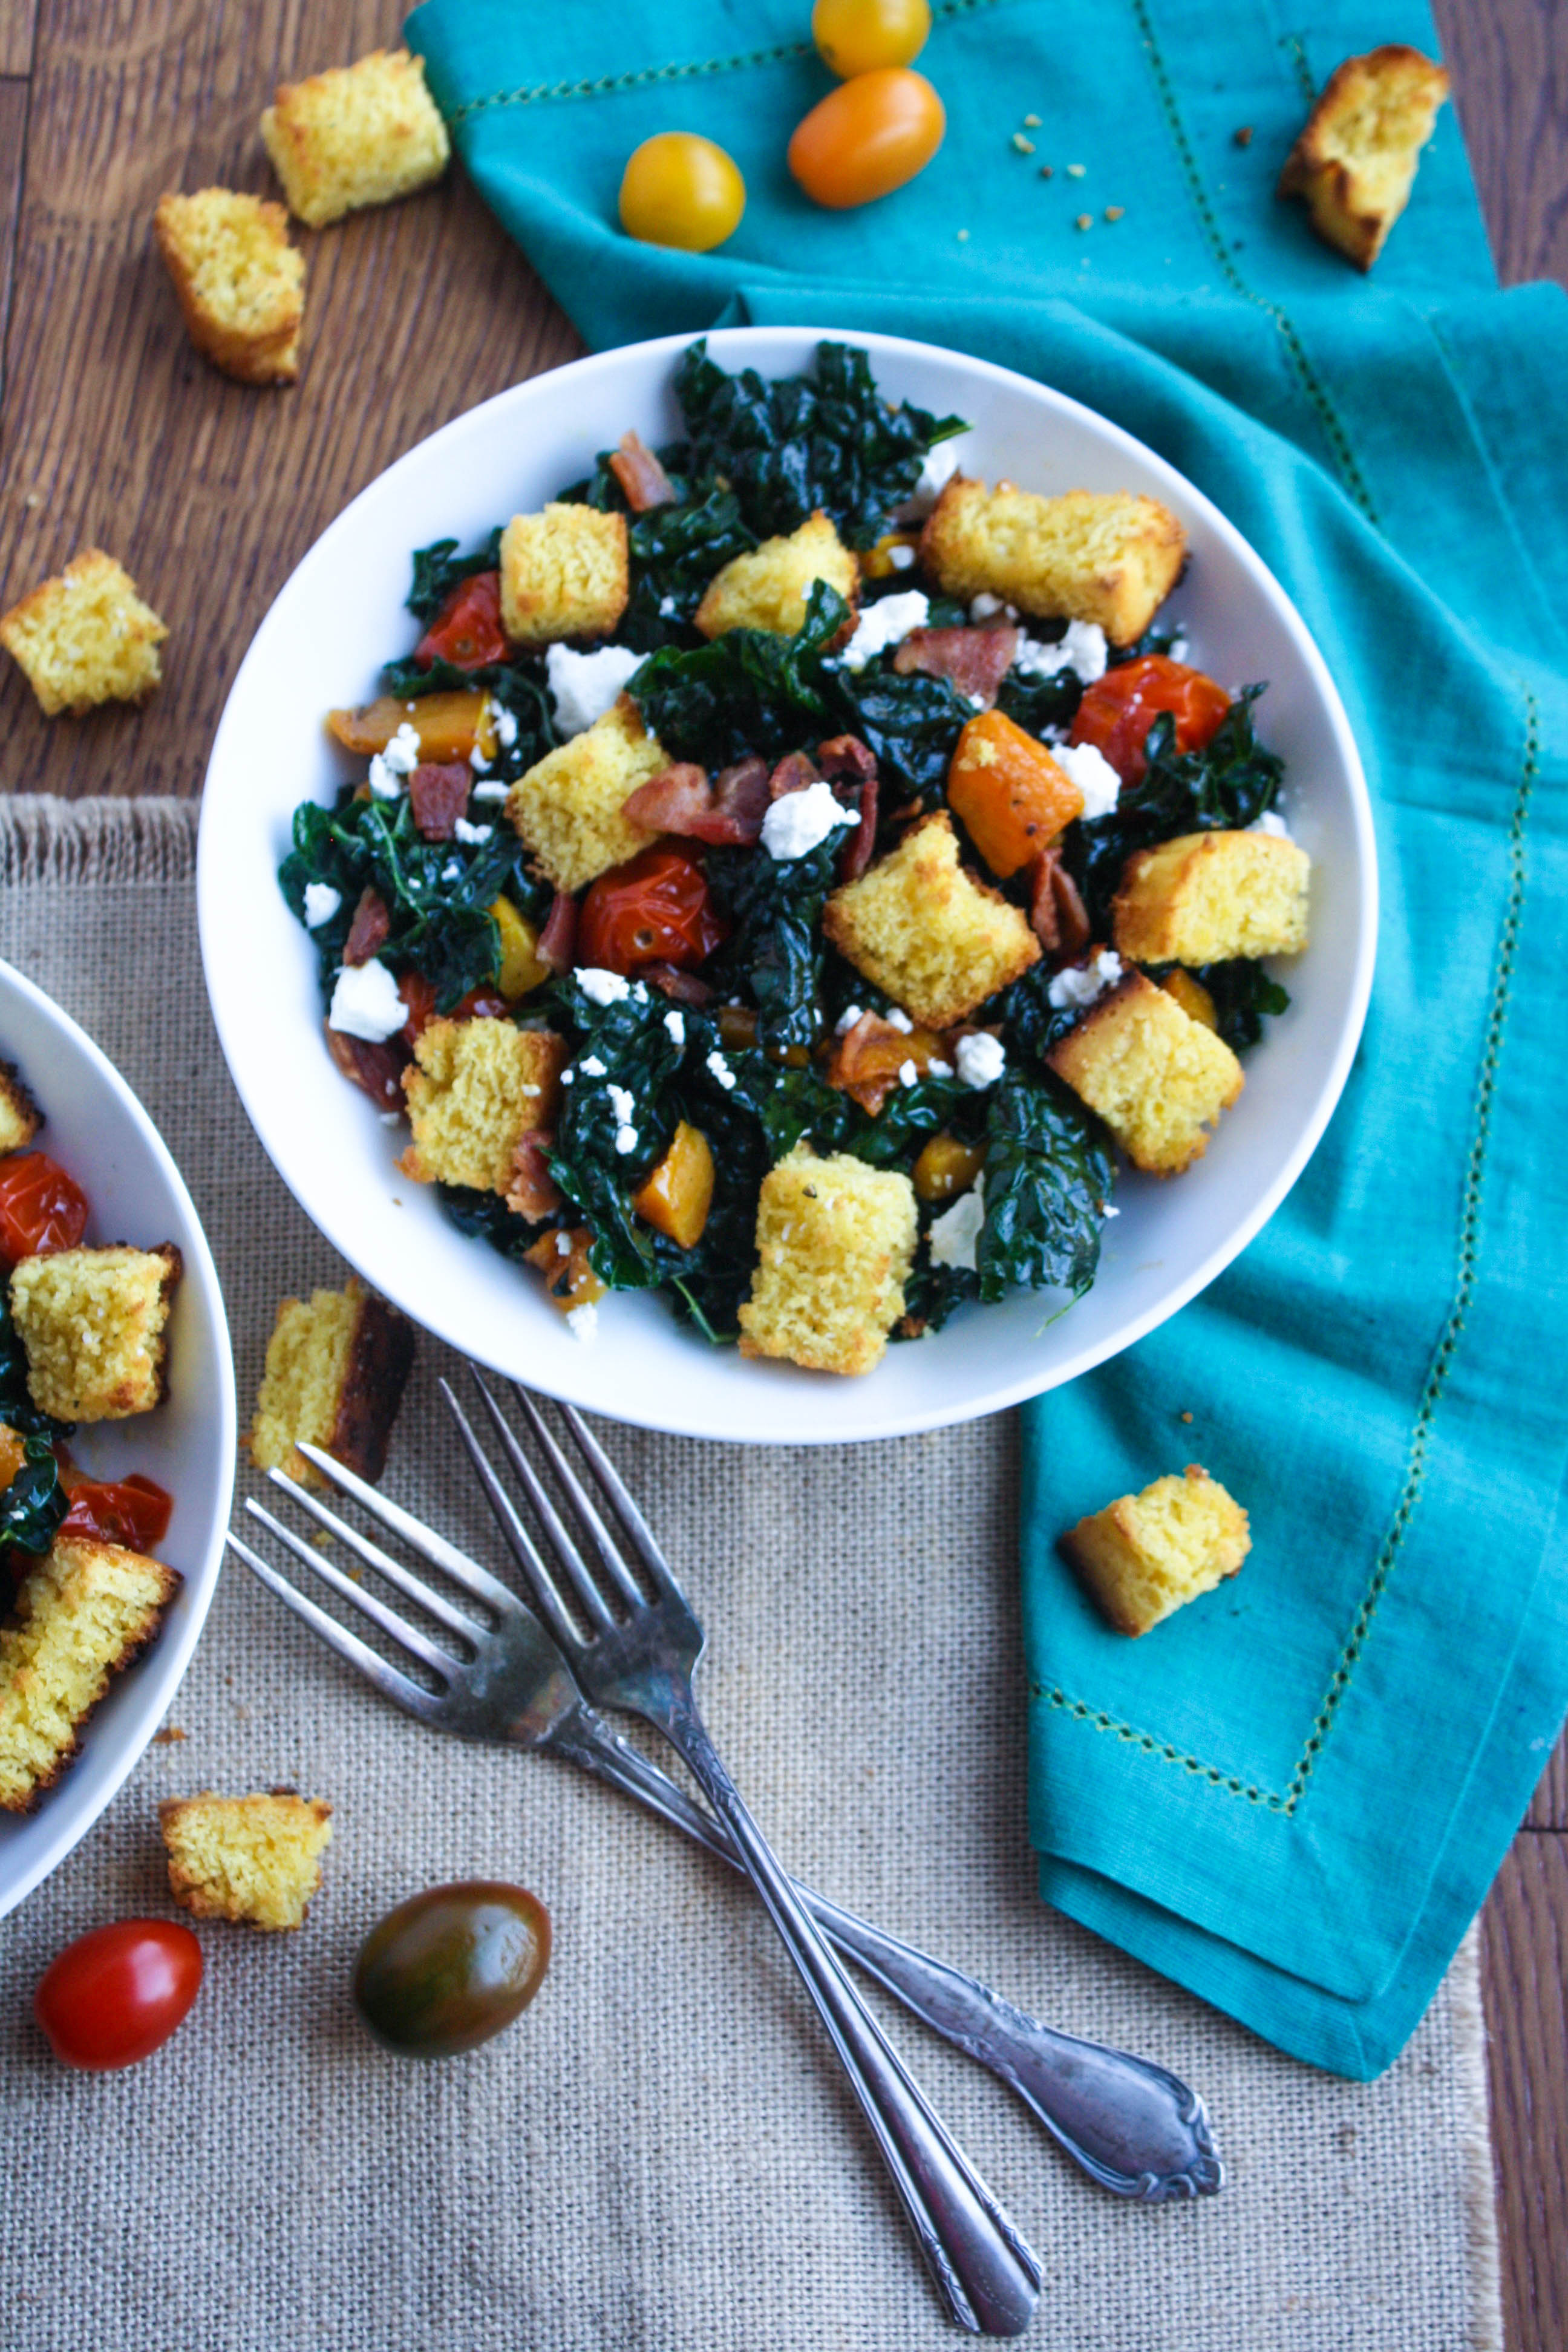 Kale and Cornbread Crouton Salad makes a great salad any day of the year, but especially after Thanksgiving. Cornbread croutons are a nice touch to this kale salad.